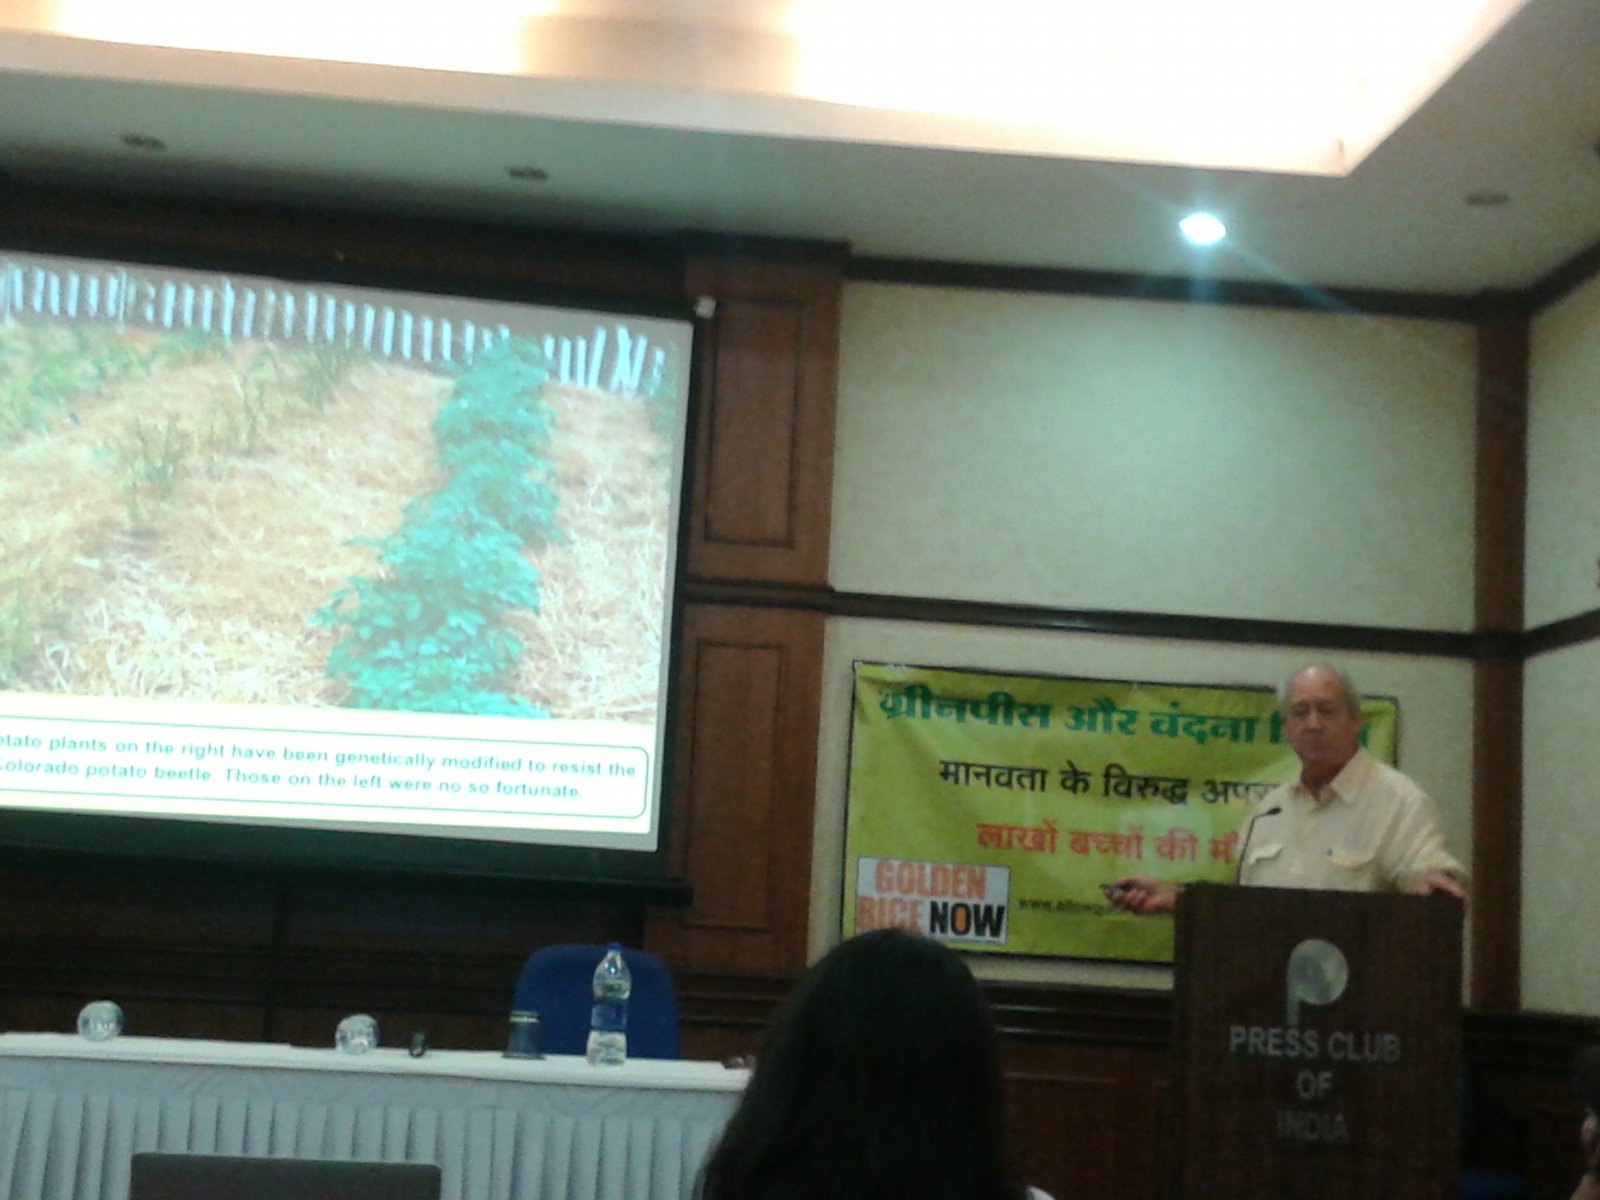 Dr Patrick Moore, former Greenpeace activist explaining the importance of Golden Rice in Indian context on March 16, 2015 at Delhi 